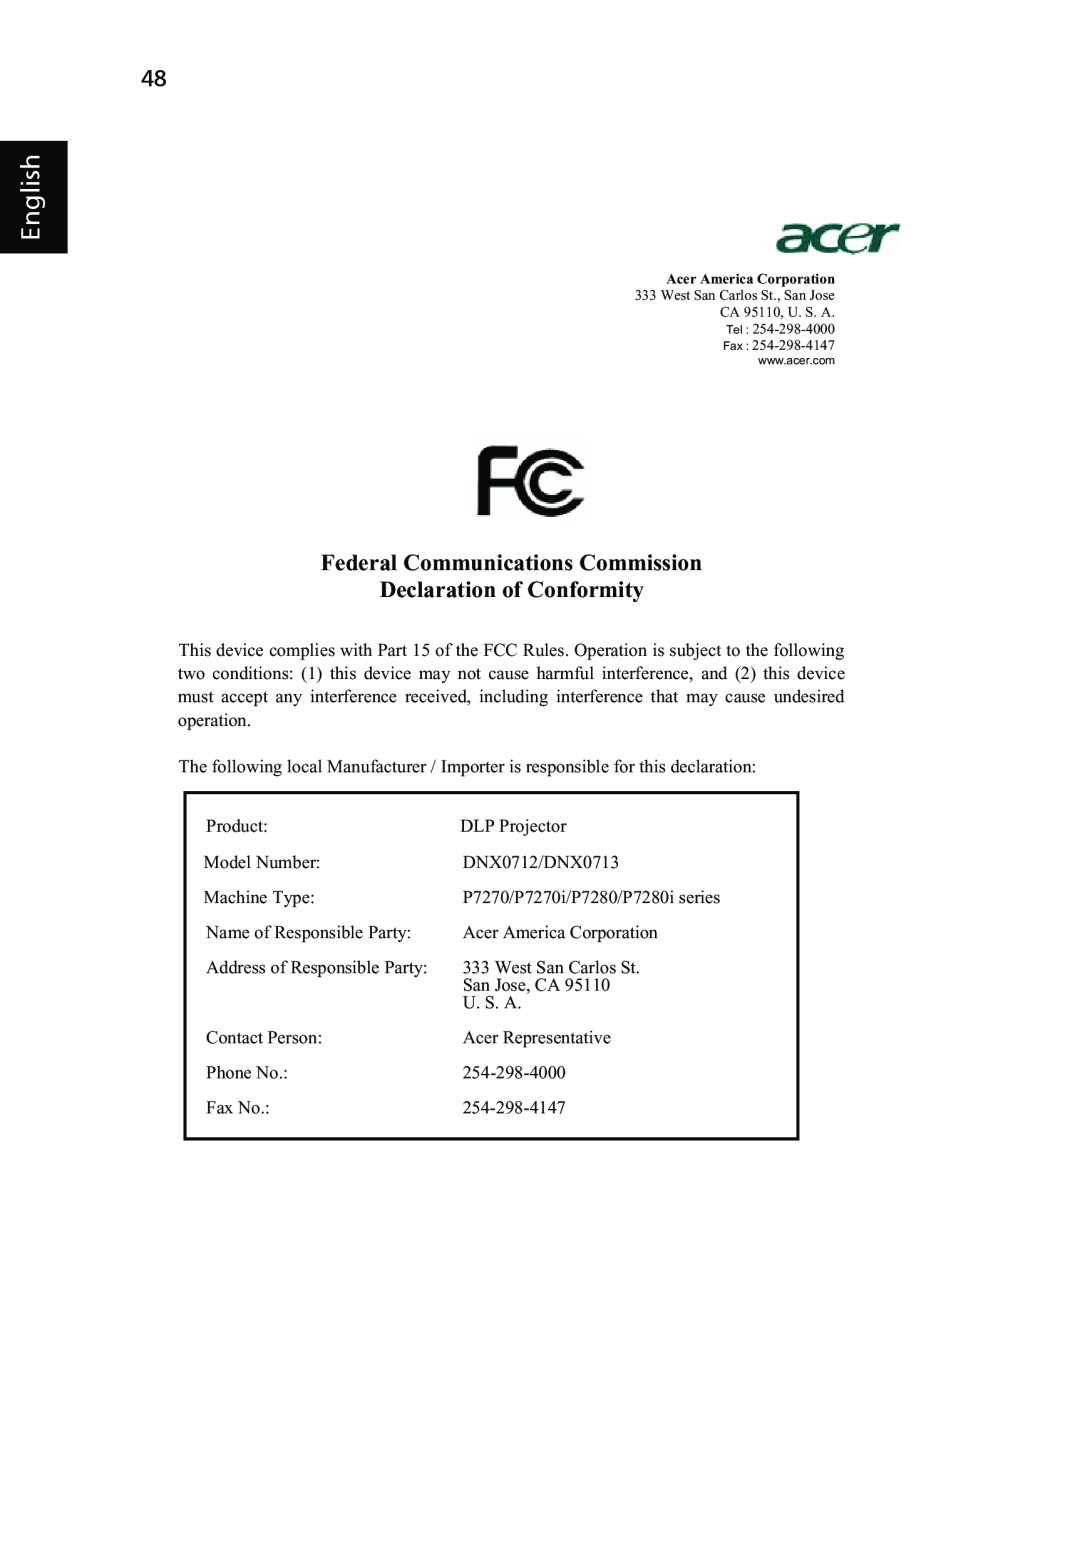 Acer P7270i, P7280i Series manual English, Federal Communications Commission Declaration of Conformity 